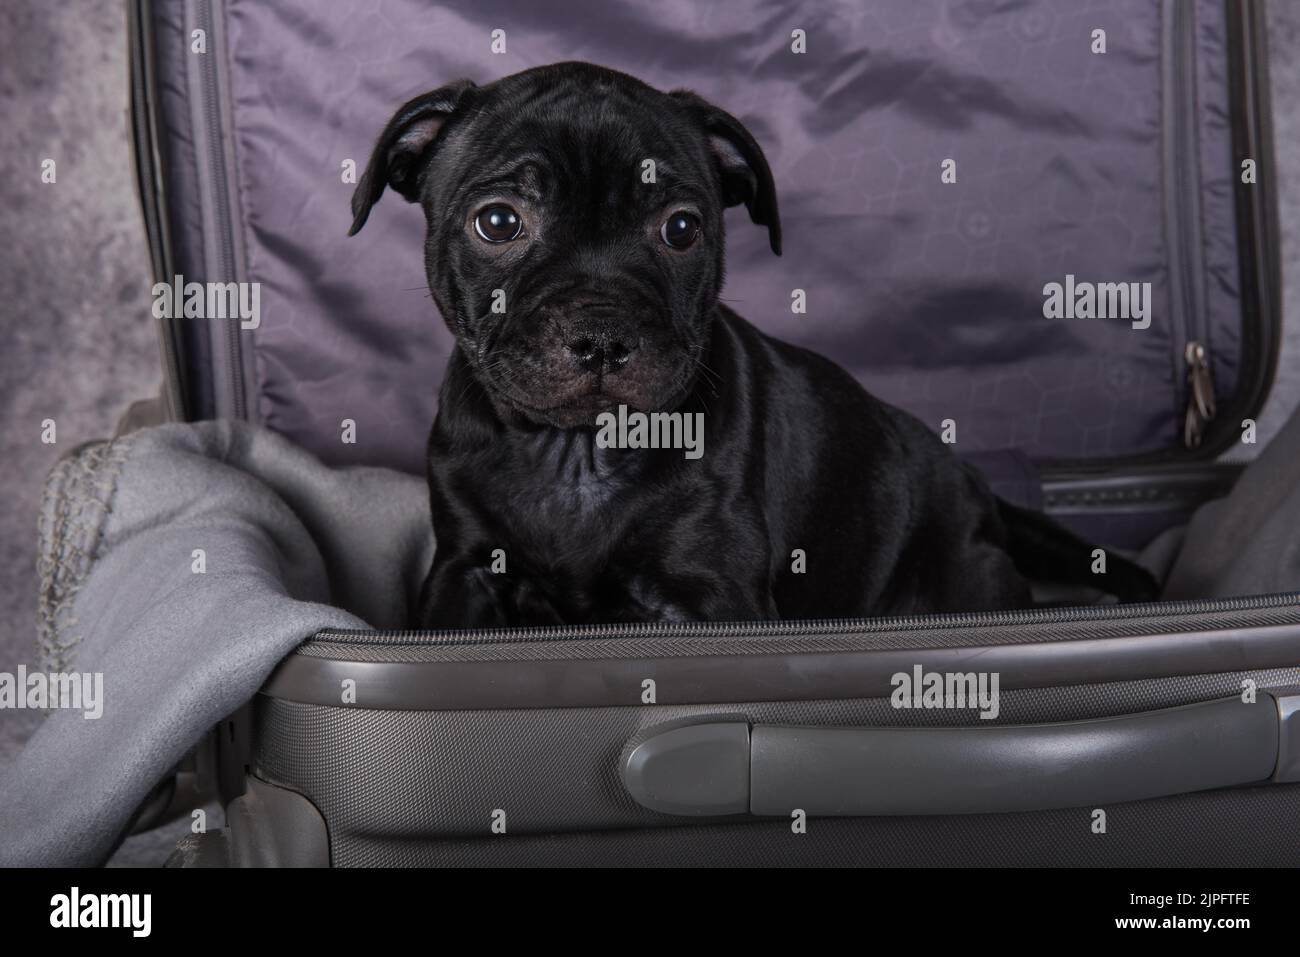 Black American Staffordshire Bull Terrier dog puppy is in a suitcas on gray background Stock Photo